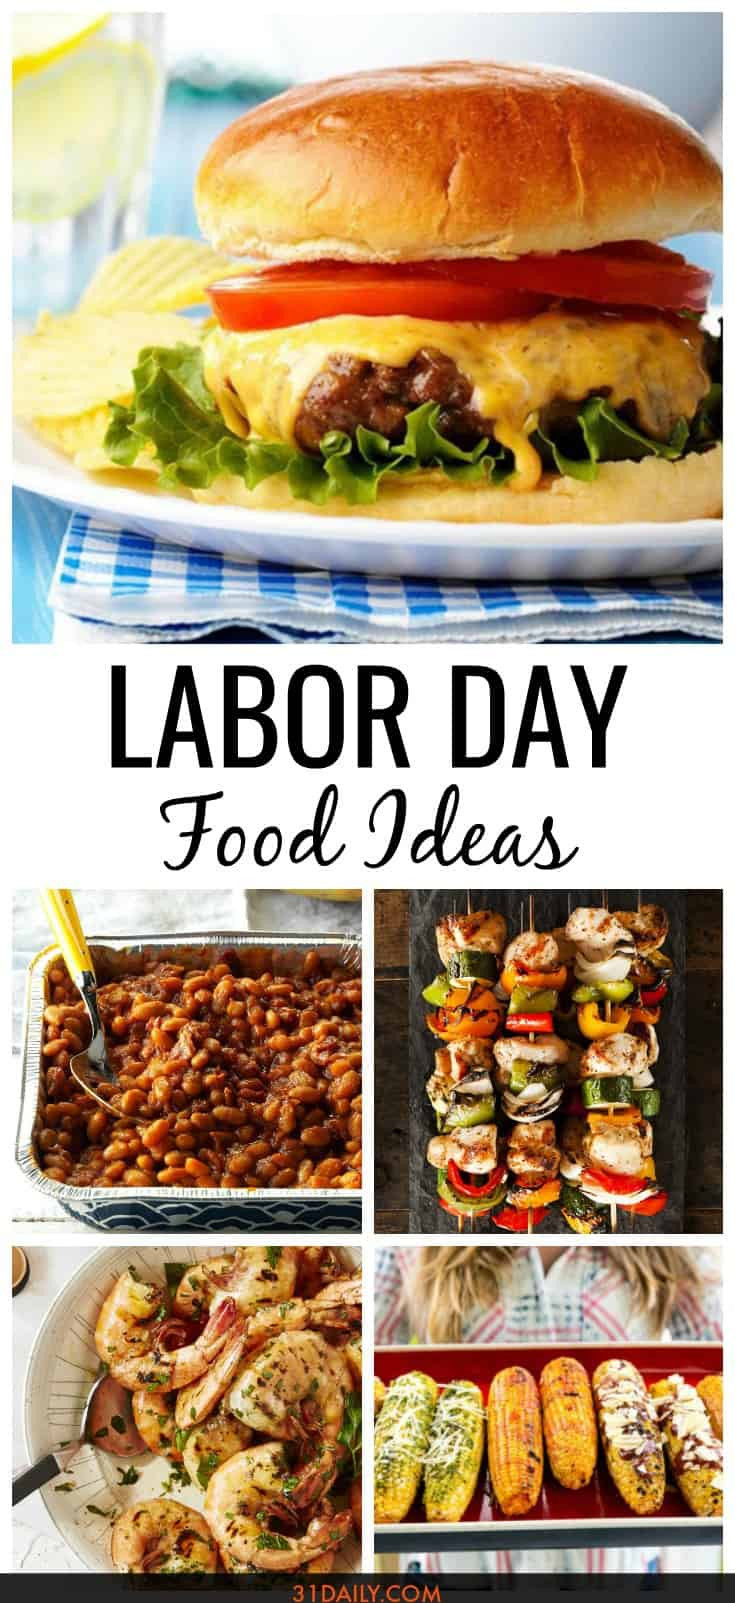 Labor Day Meal Ideas
 End of Summer Labor Day Food Ideas 31 Daily